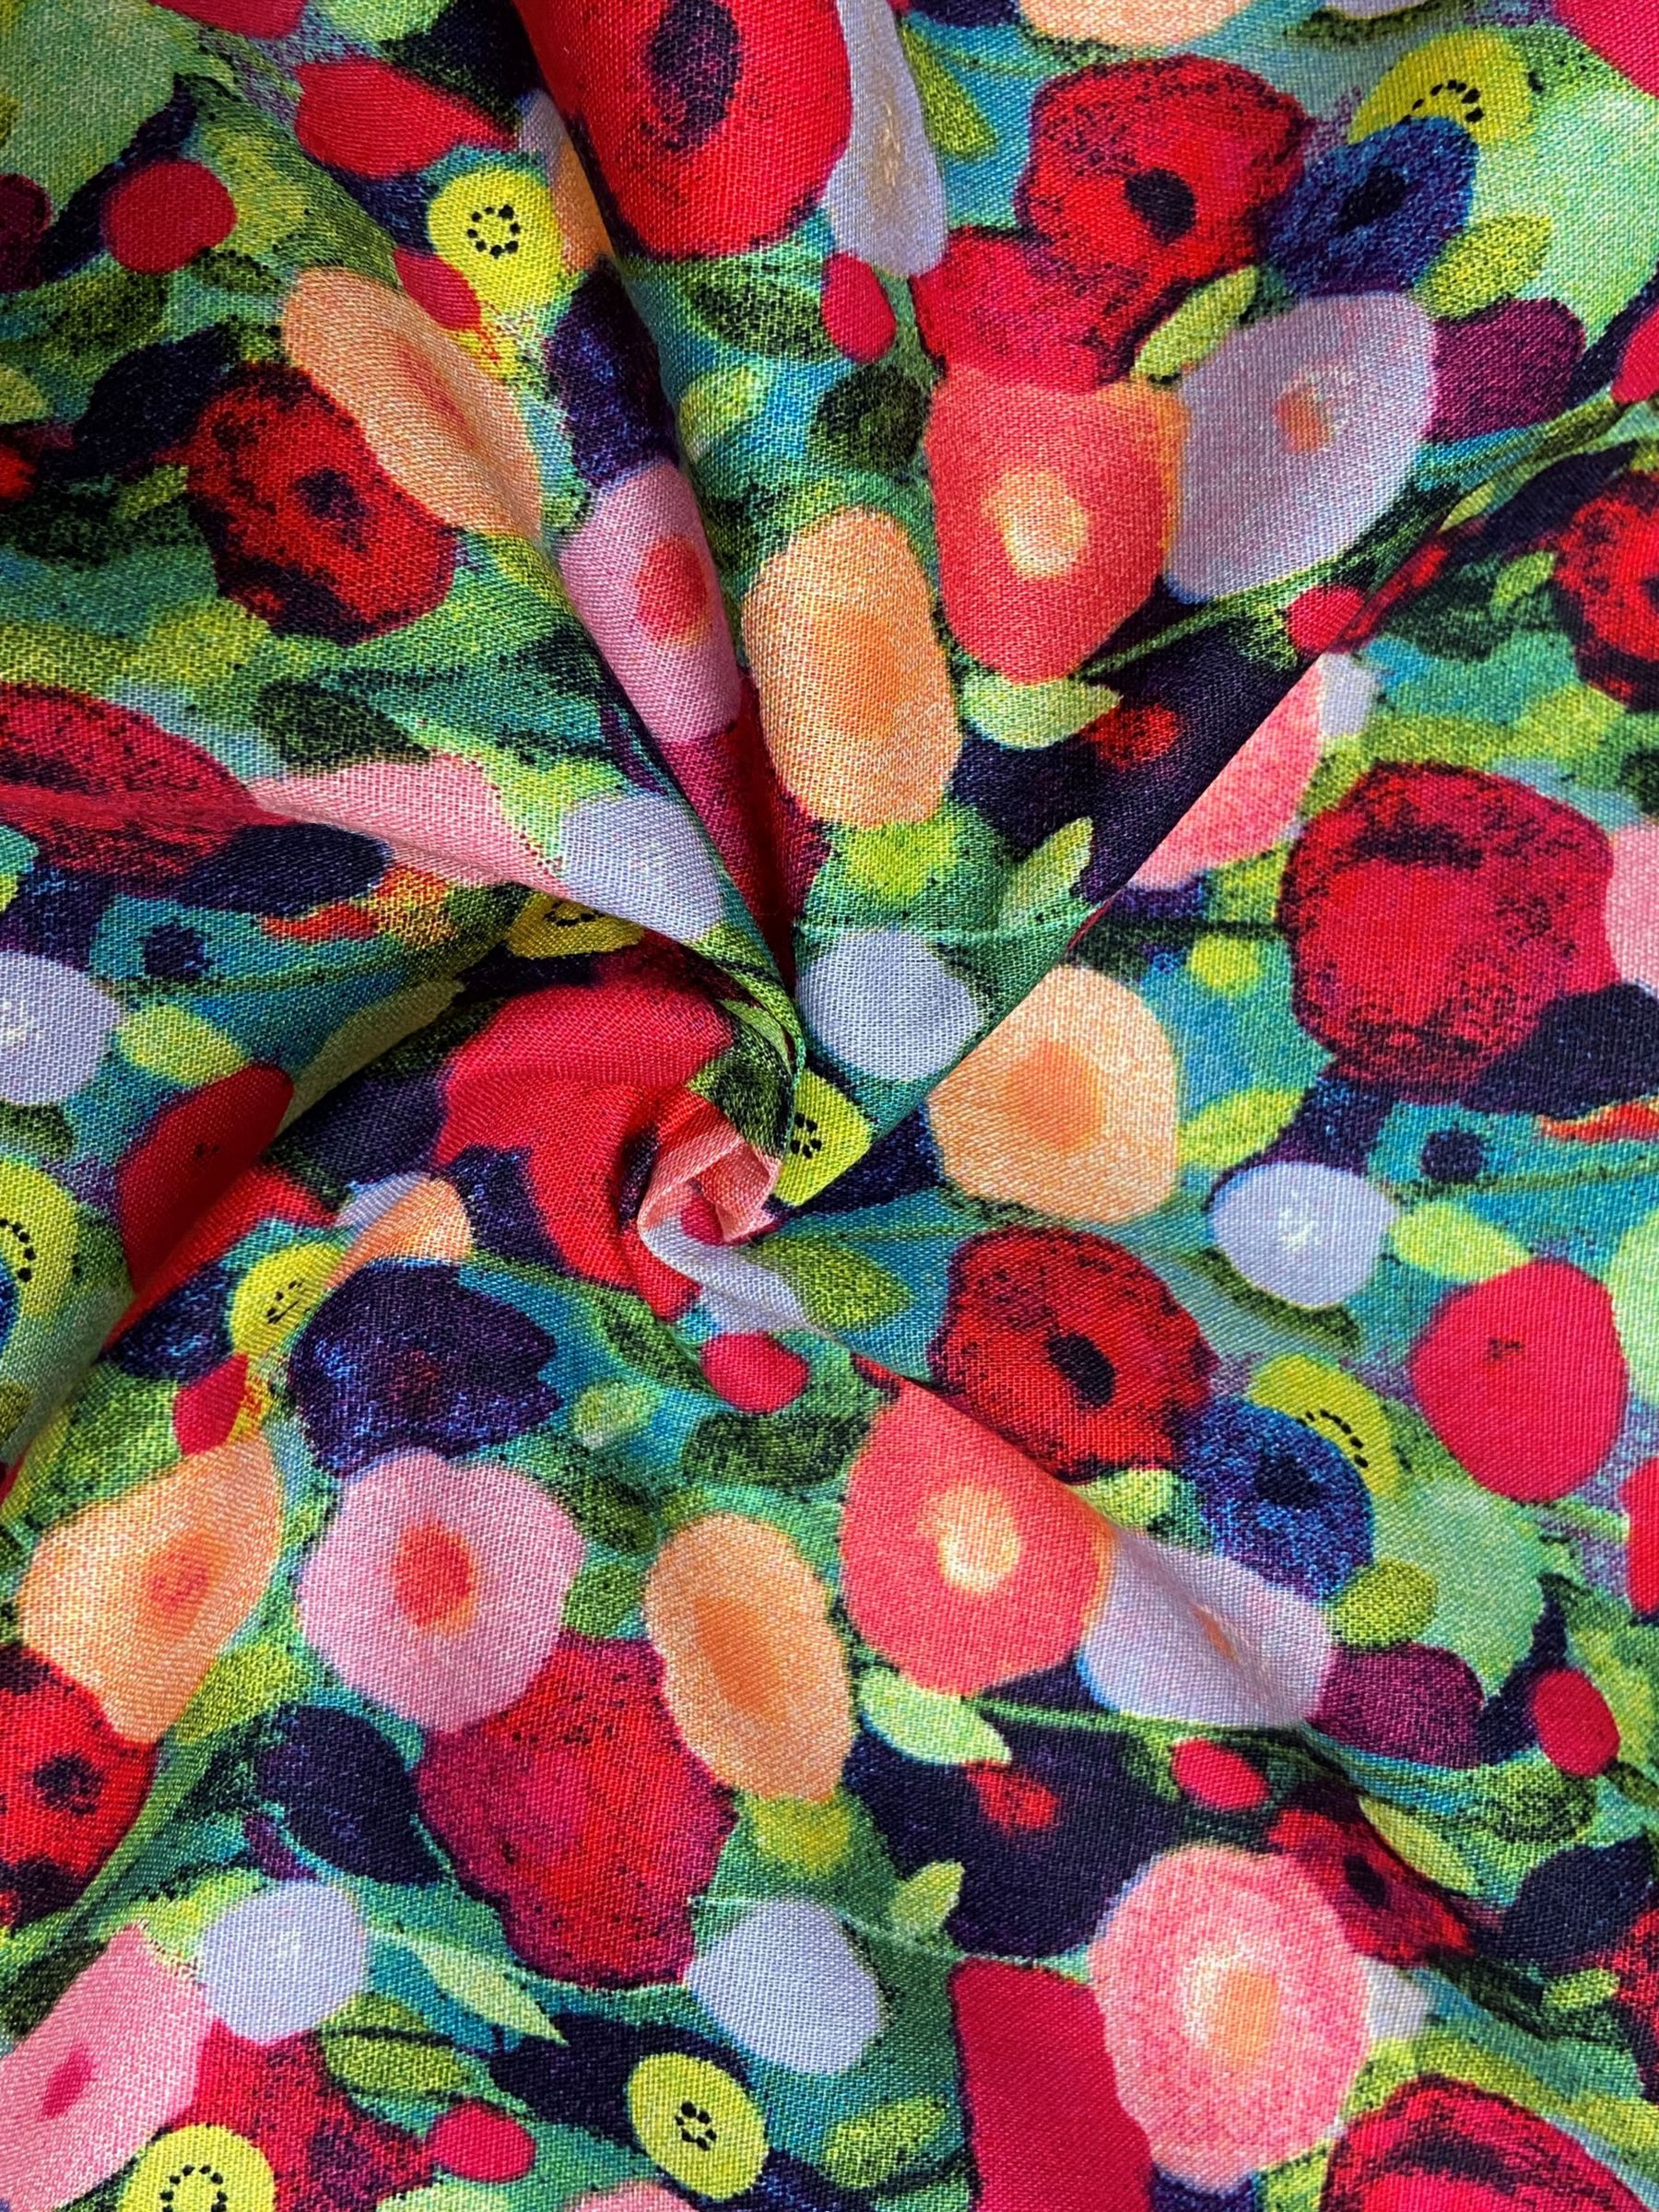 Viscount Textiles Bright Abstract Florals Cotton Lawn Fabric, Multi